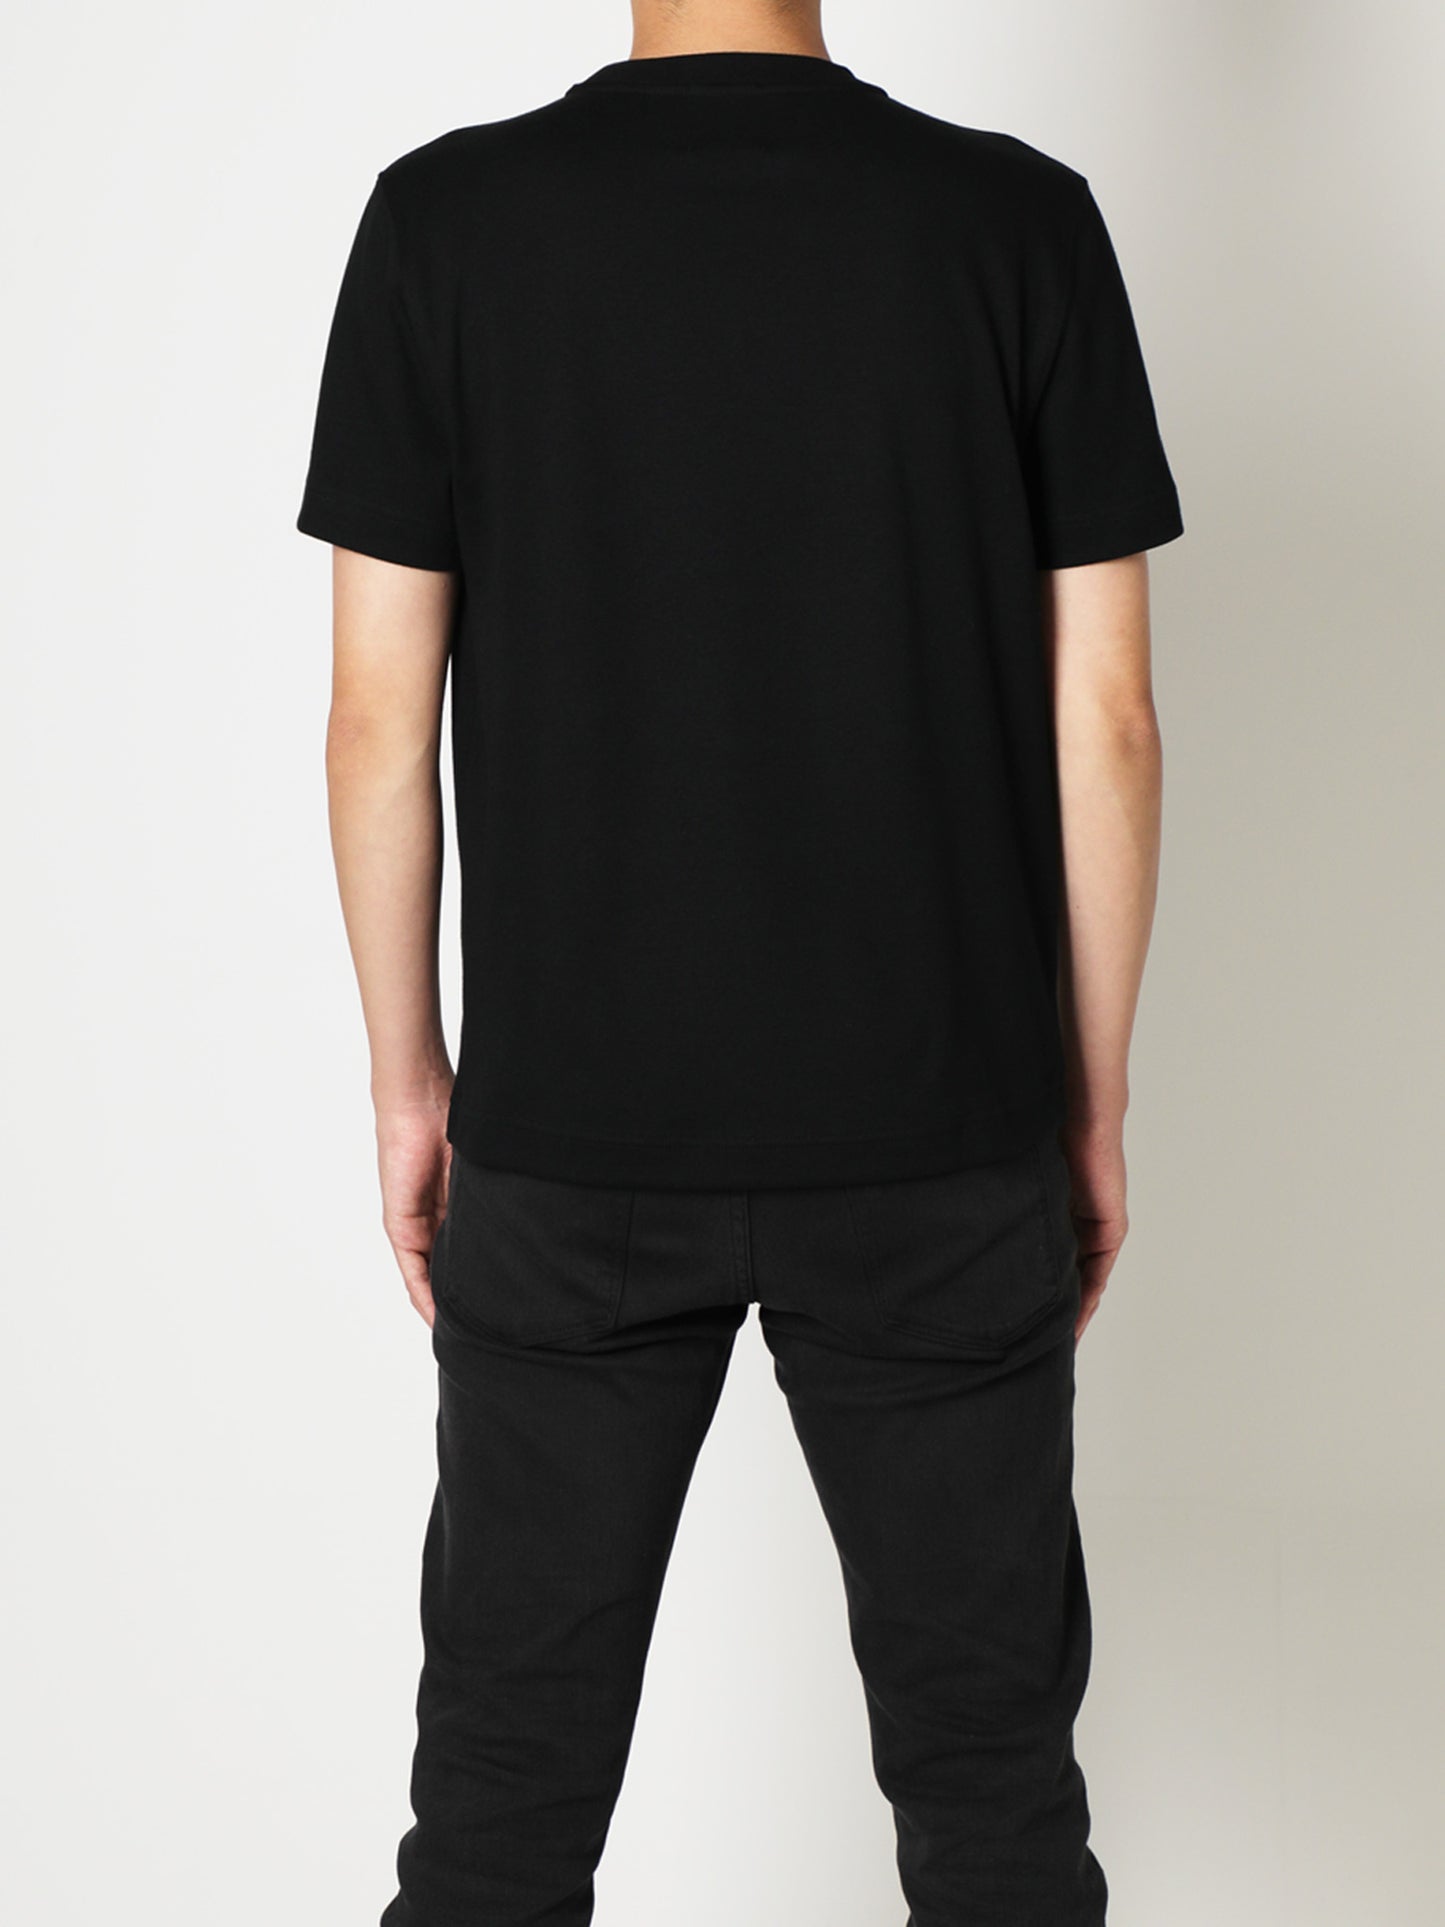 Regular Fitted Basic Tee shirts